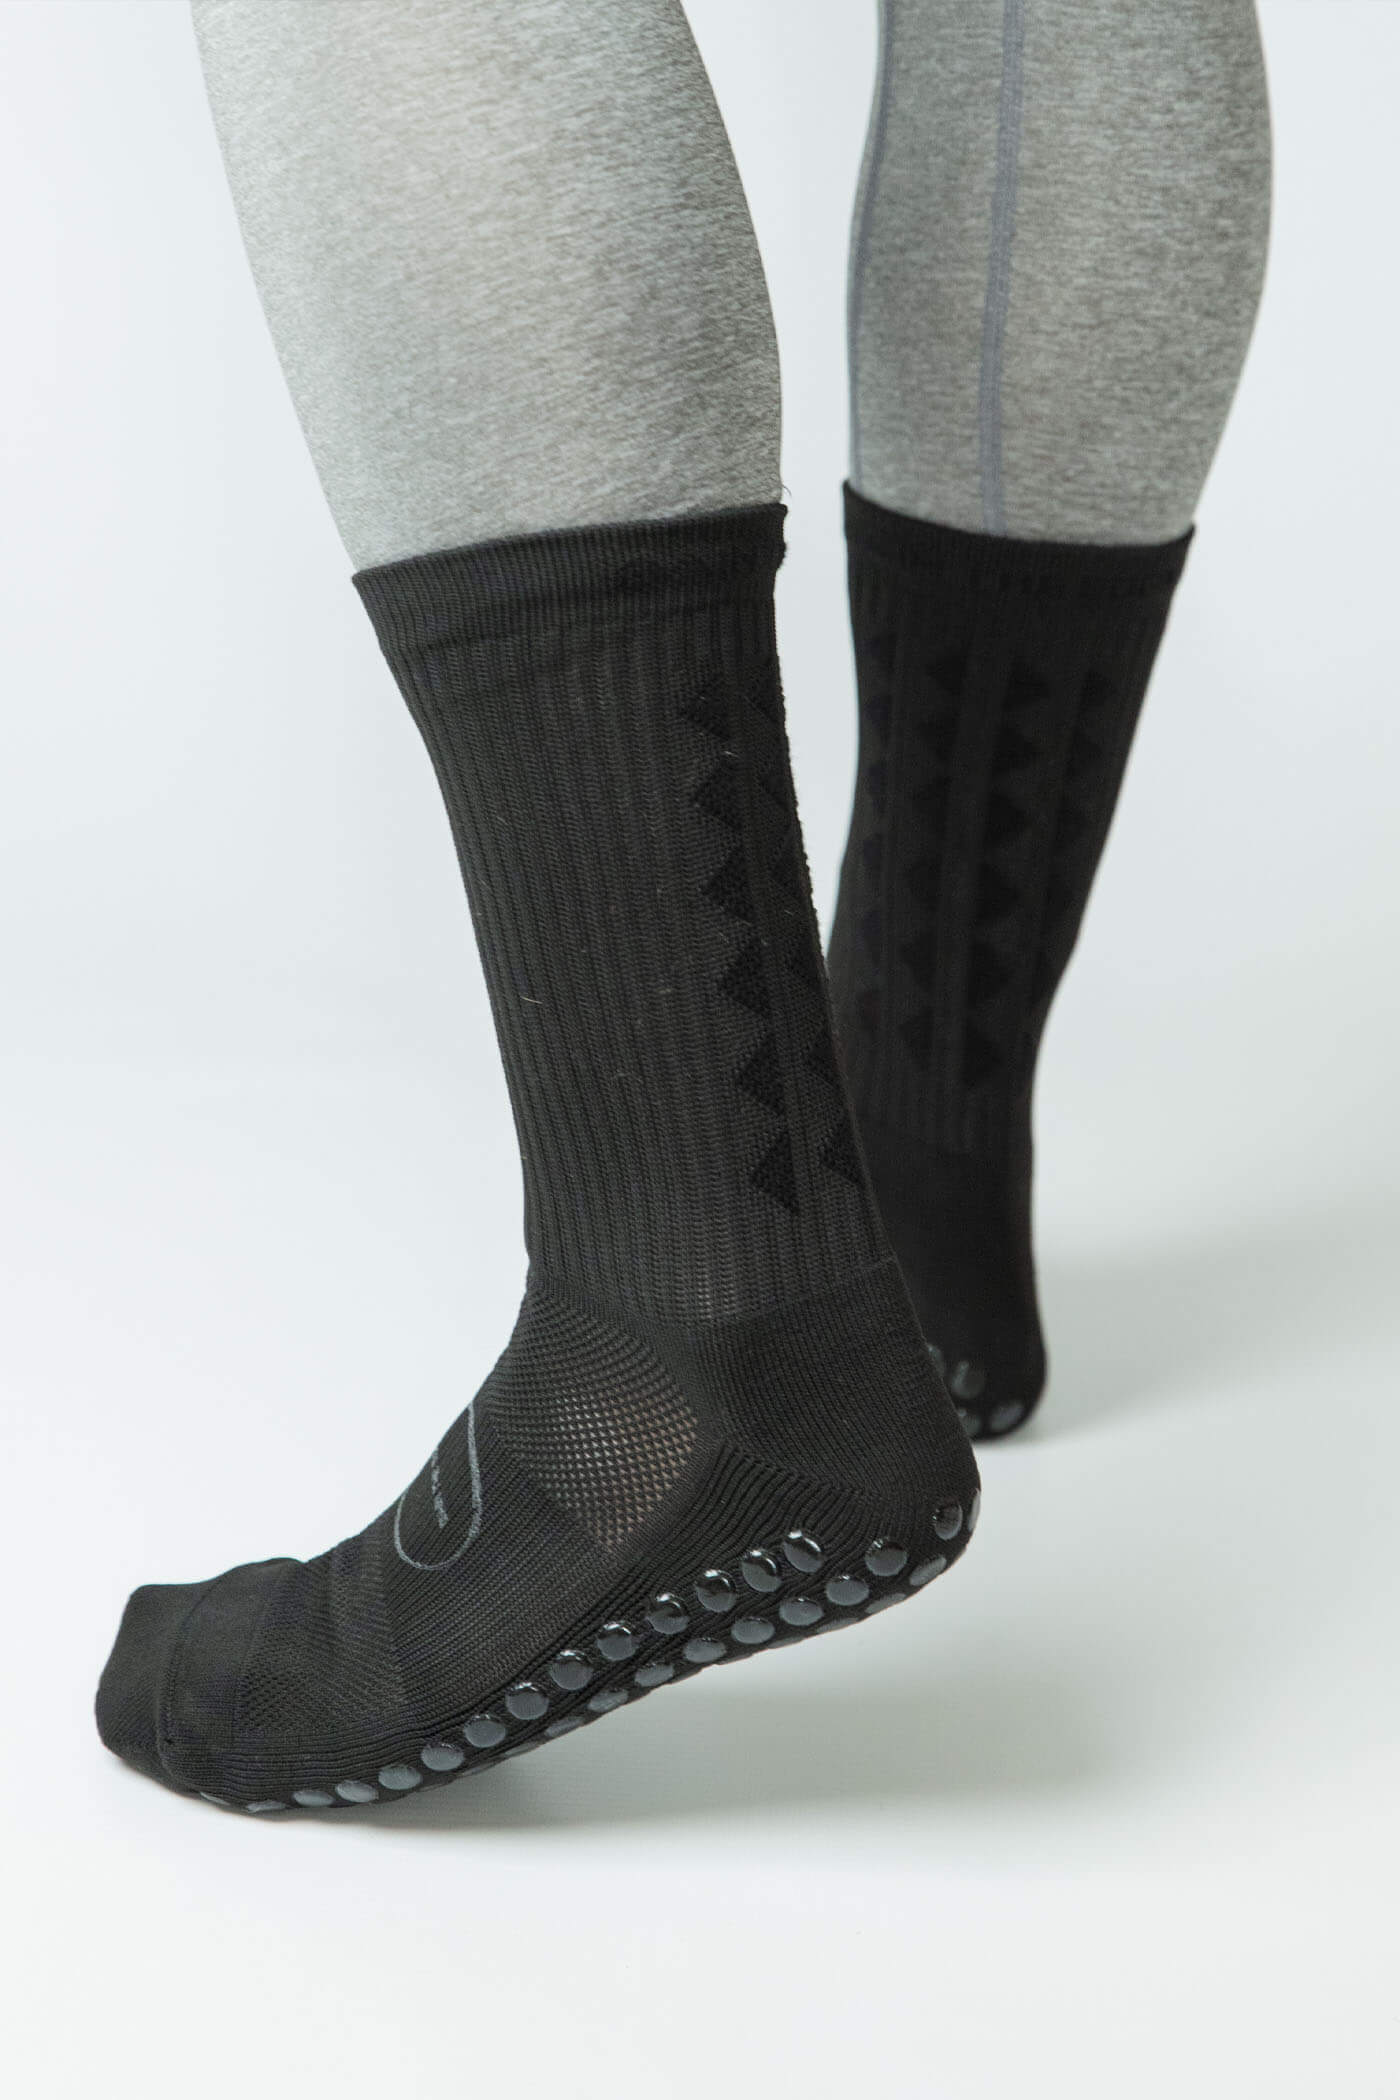 BLACKOUT LIMITED EDITION GRIP SOCKS 2.0 – Gain The Edge Official